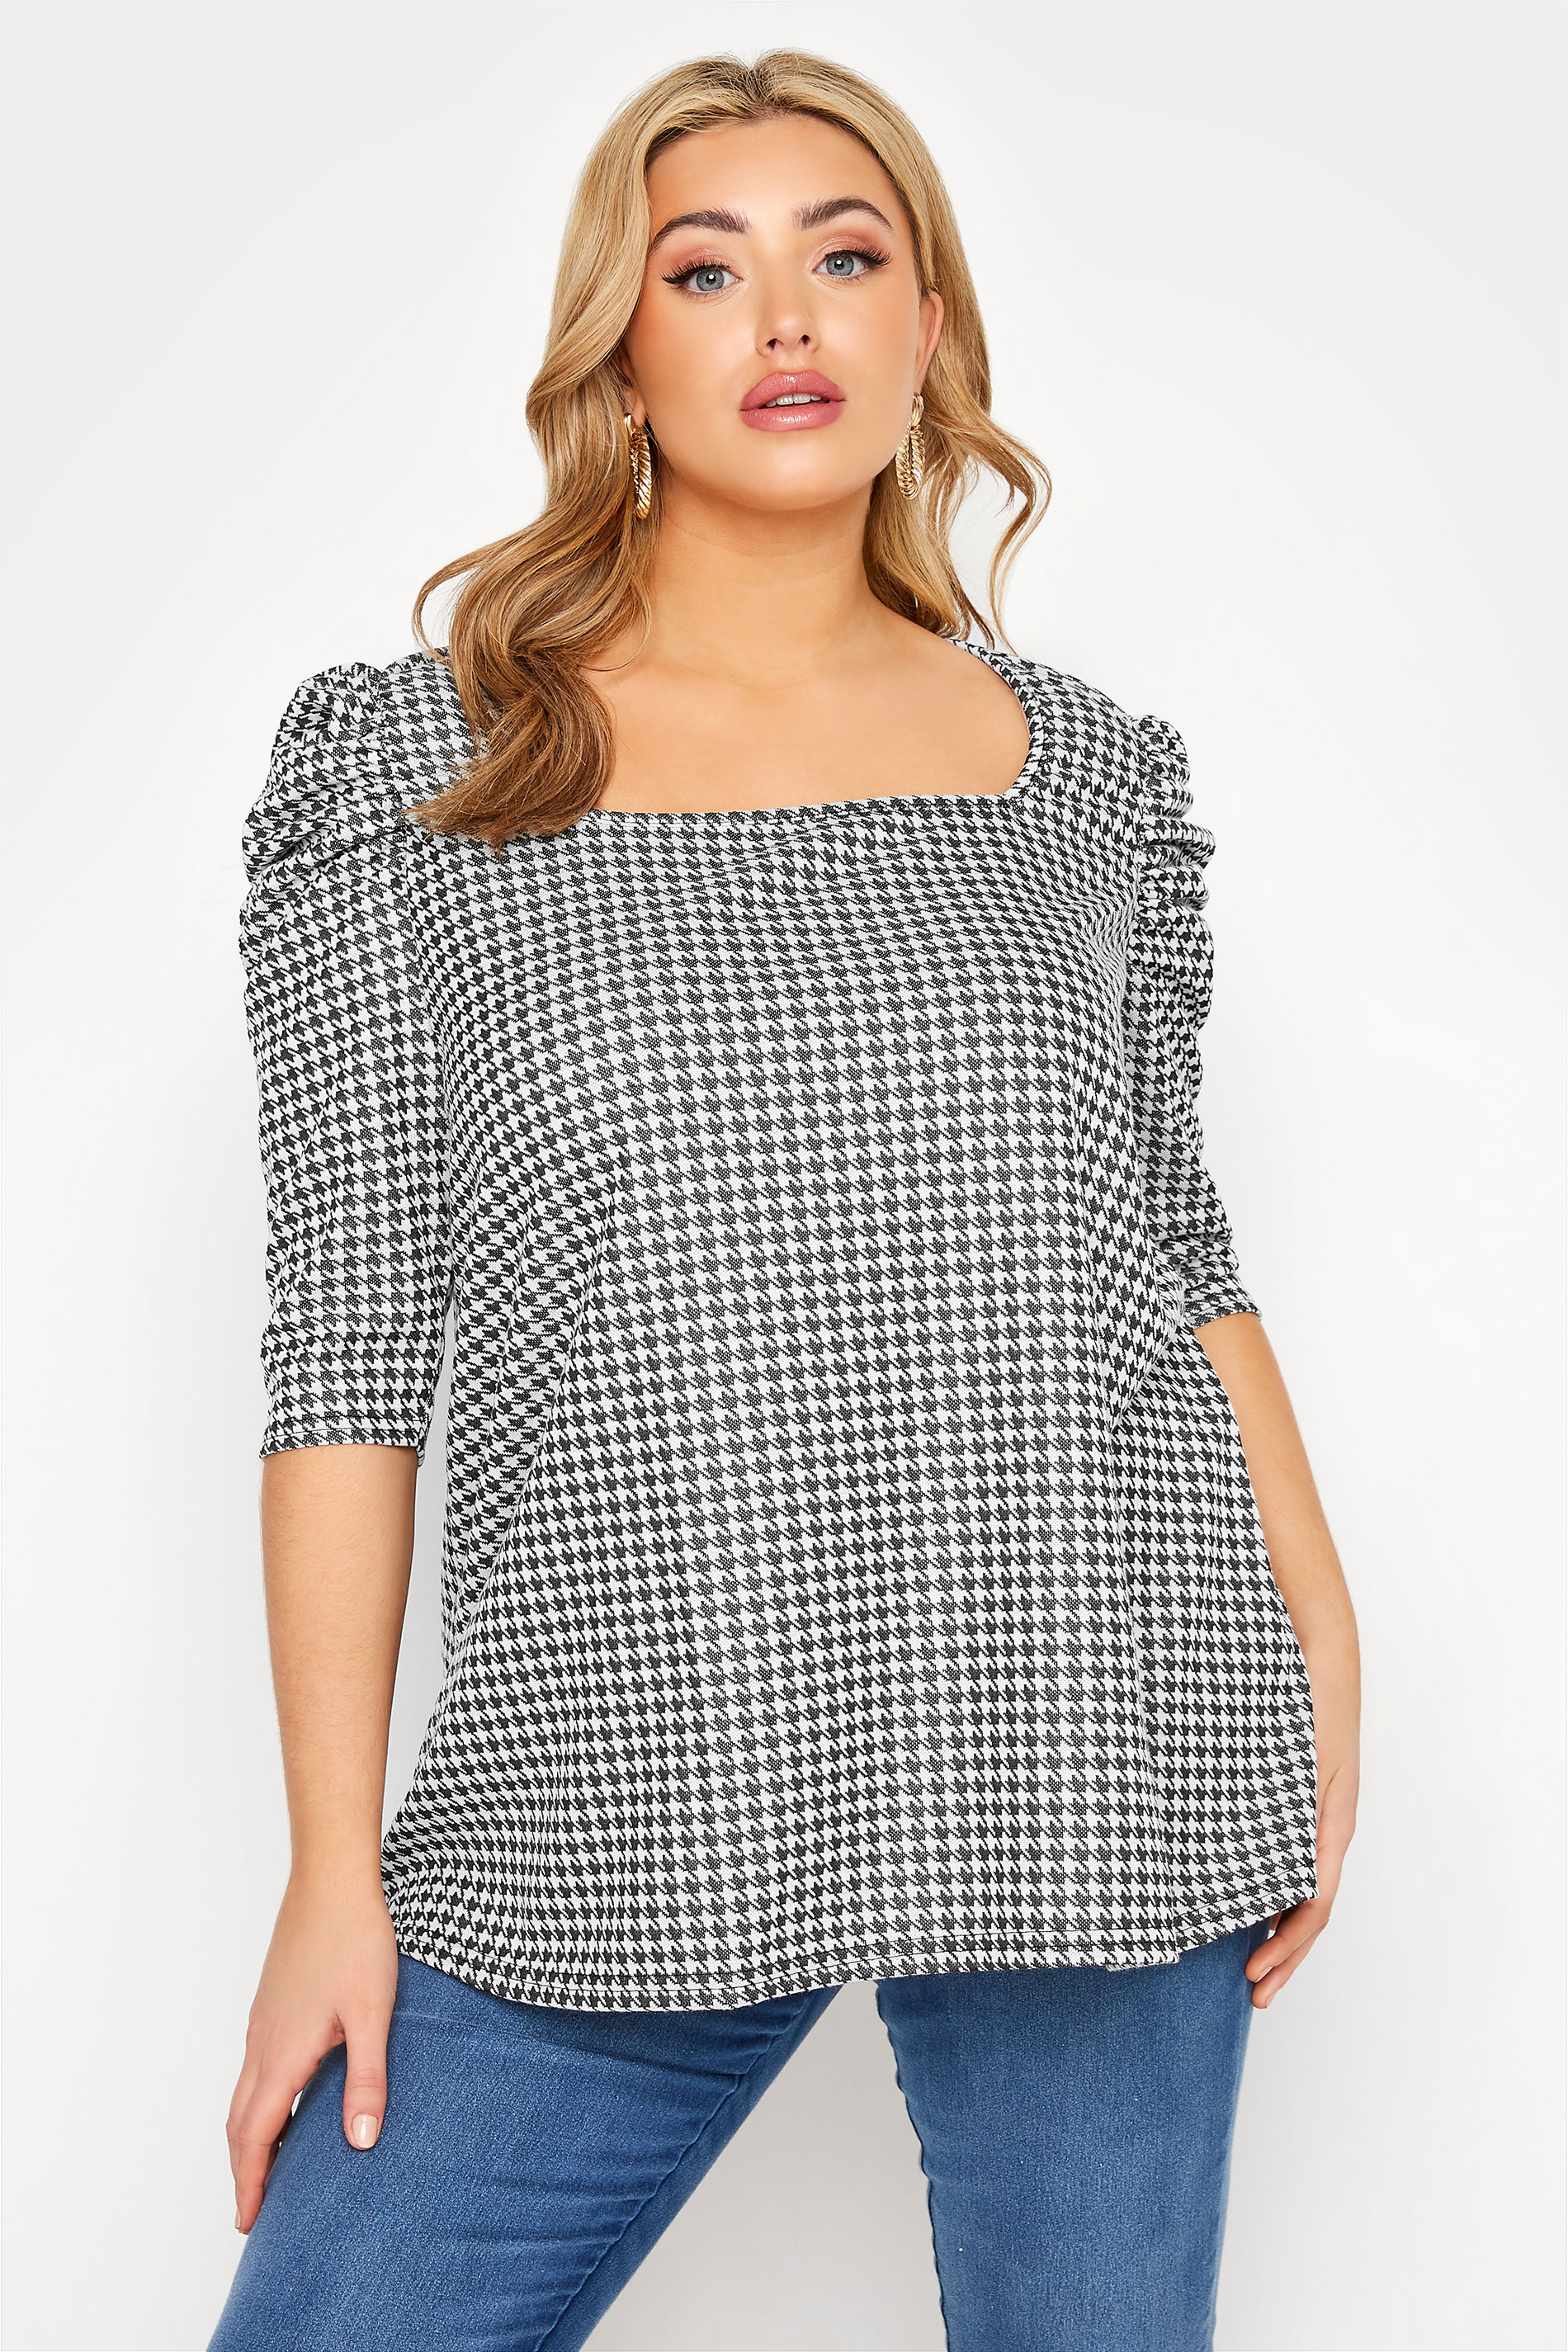 Womens Plus Size Top Check Dogtooth Printed Short Sleeve Ladies Long T-Shirt 